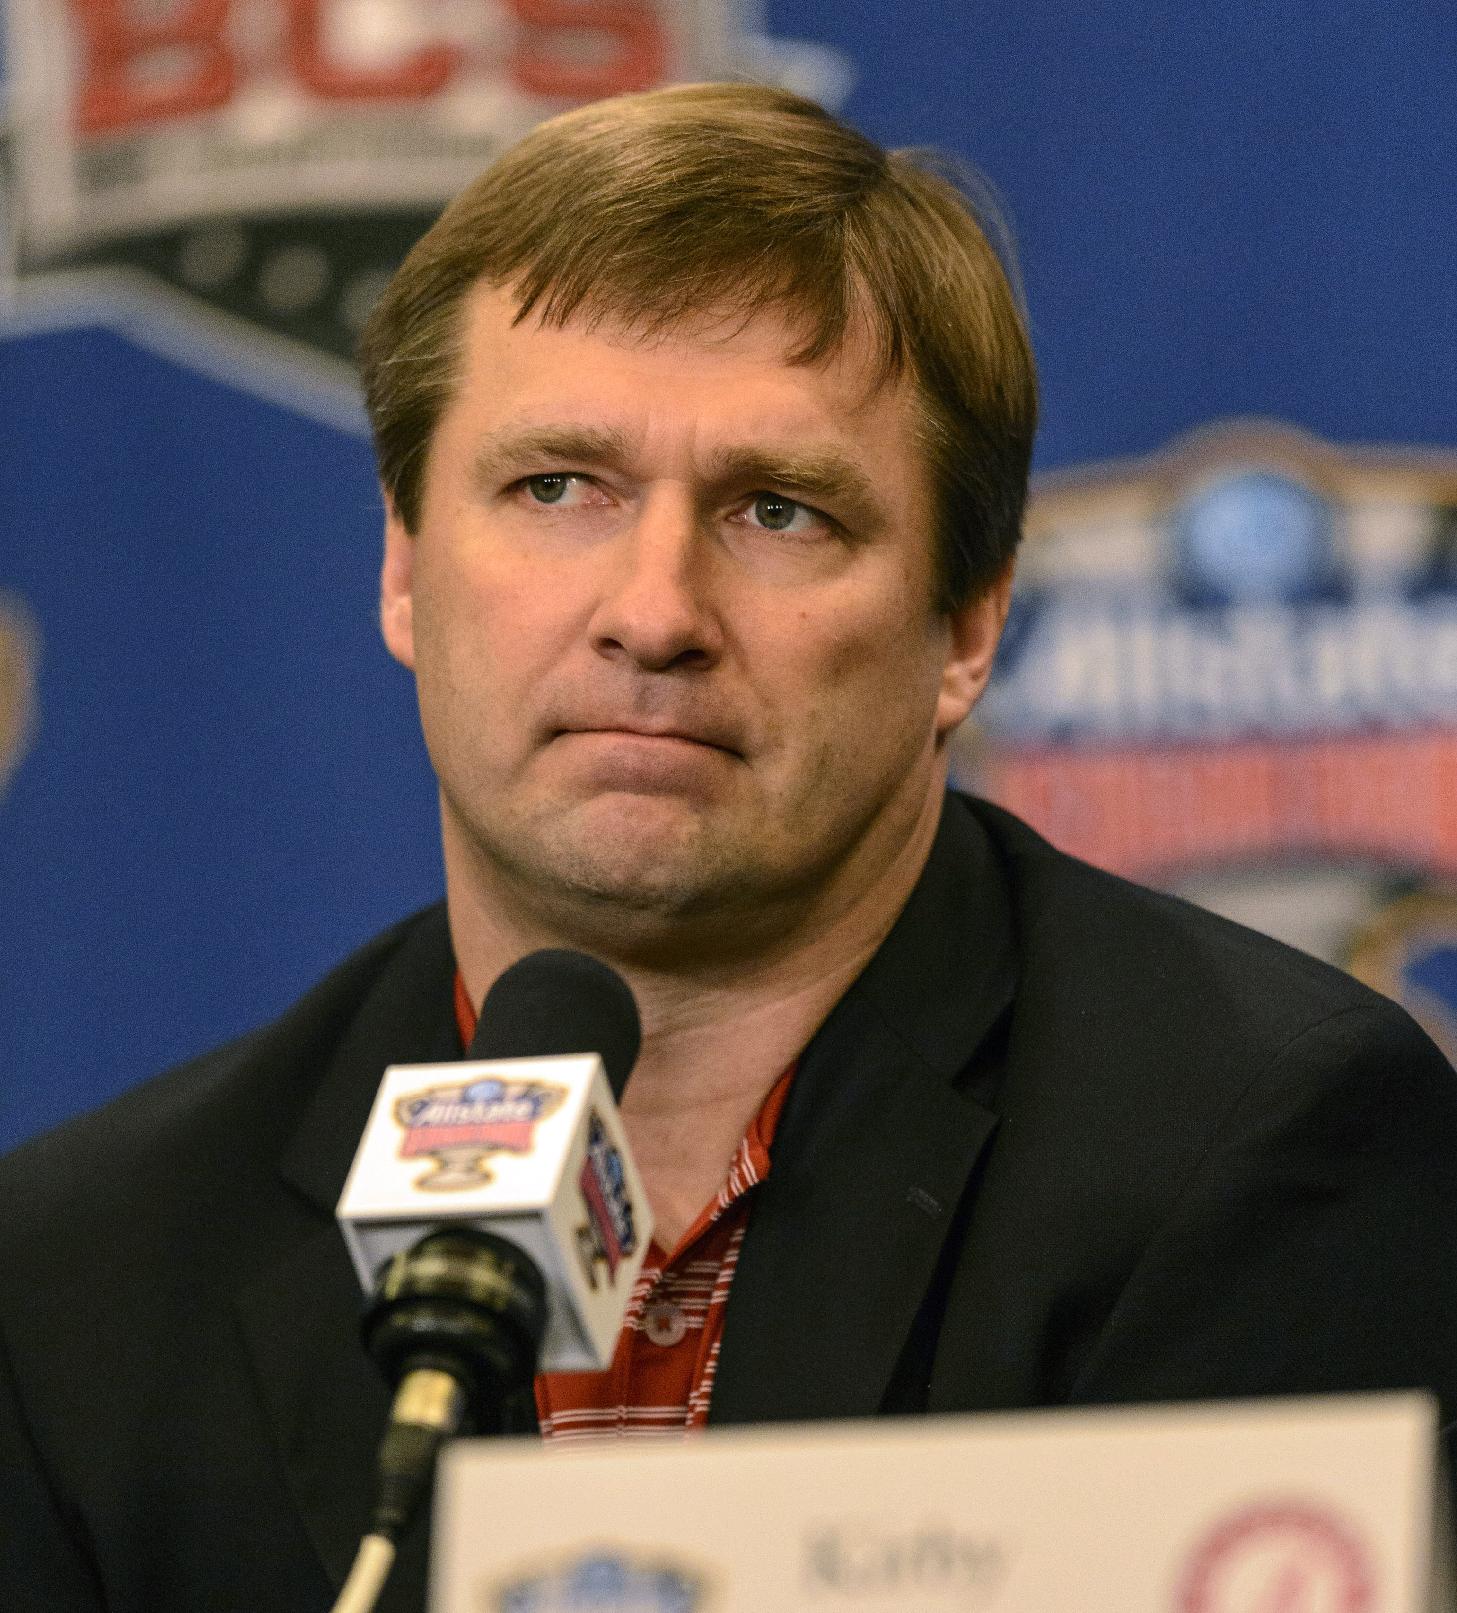 Alabama defensive coordinator/linebackers coach Kirby Smart talks about NCAA college football Sugar Bowl prep as Alabama's defensive representatives meet with the media, Monday, Dec. 30, 2013, in New Orleans. Alabama and Oklahoma face off in the Sugar Bowl, on Jan. 2, 2014. (AP Photo/Alabama Media Group, Vasha Hunt)